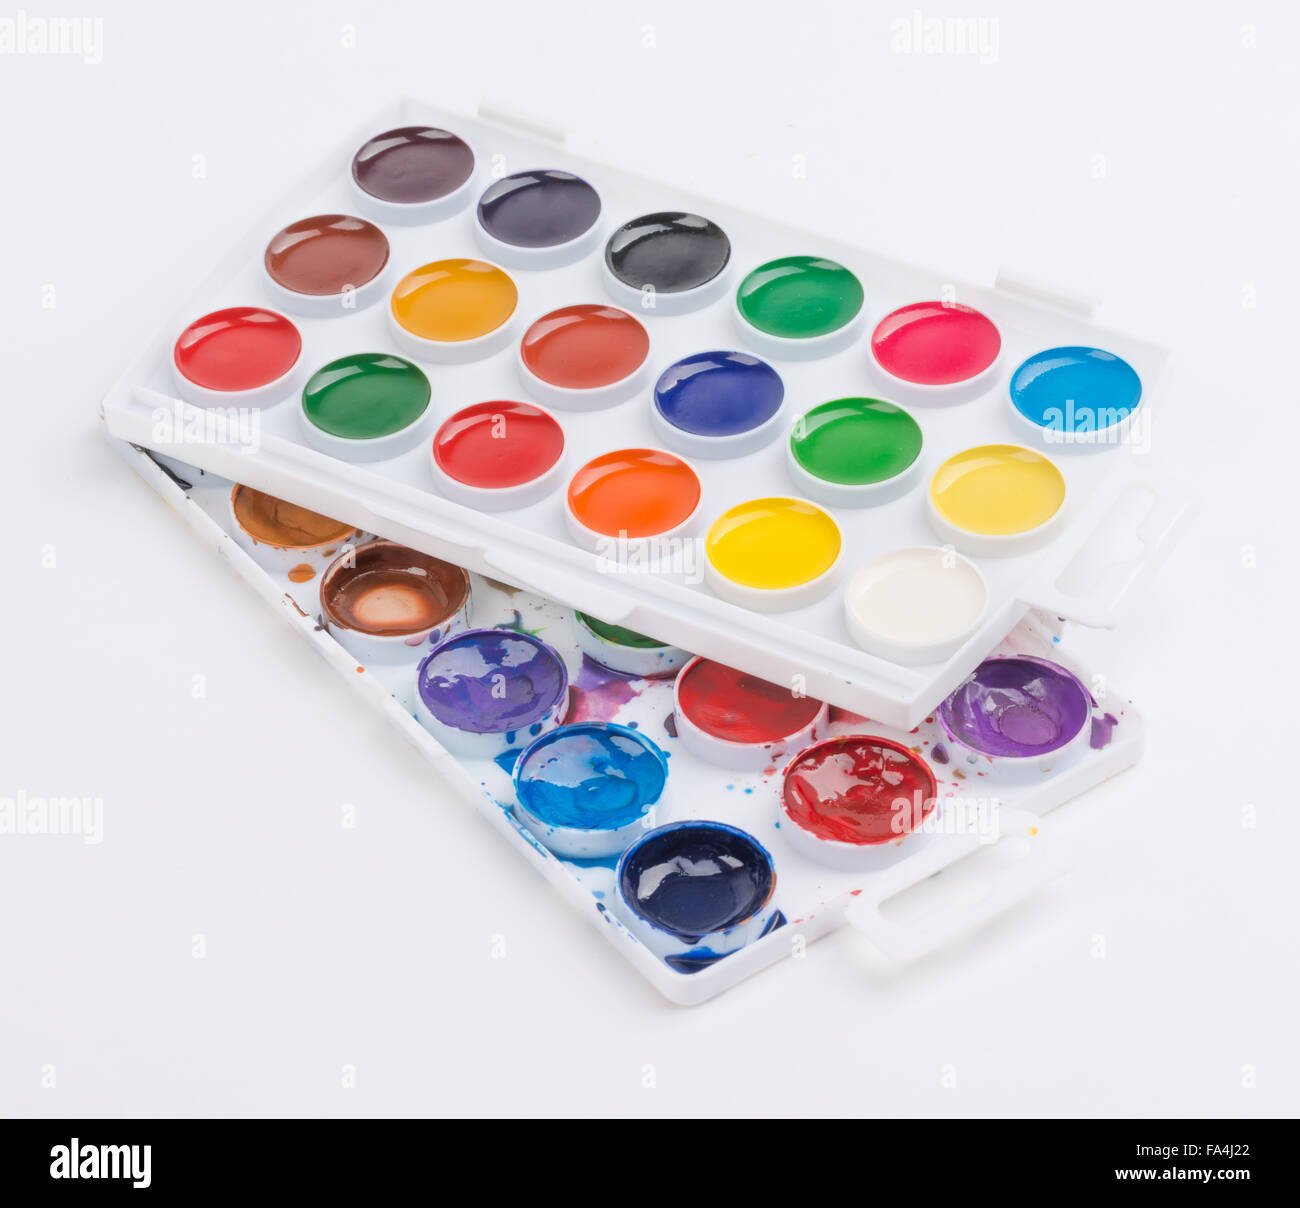 Water color paint set stock photo. Image of water, isolation